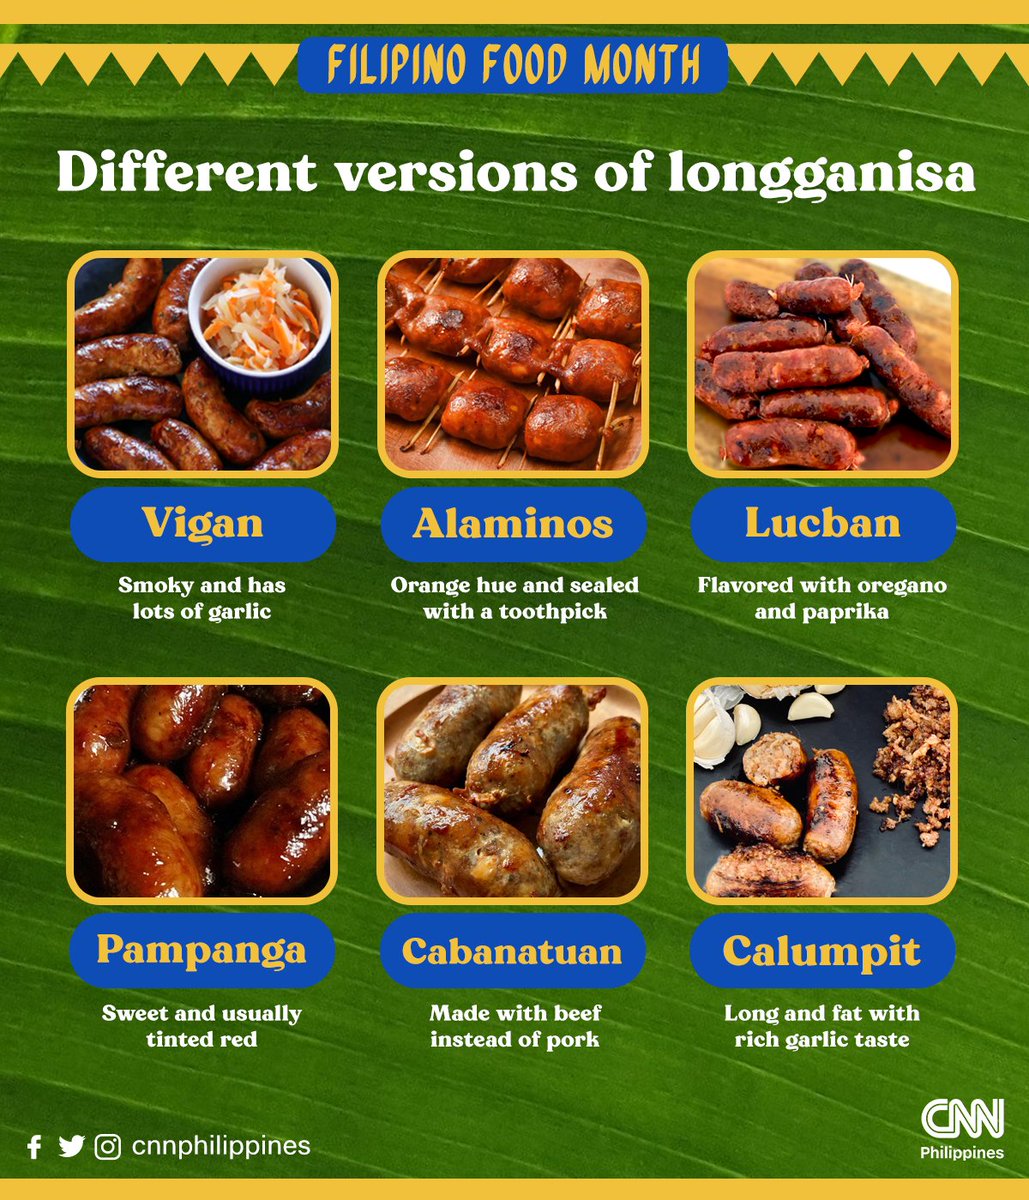 This #FilipinoFoodMonth, we honor one of the ultimate breakfast staples: the longganisa.

This Filipino sausage has several varieties, which differ depending on the region. Which is your favorite?